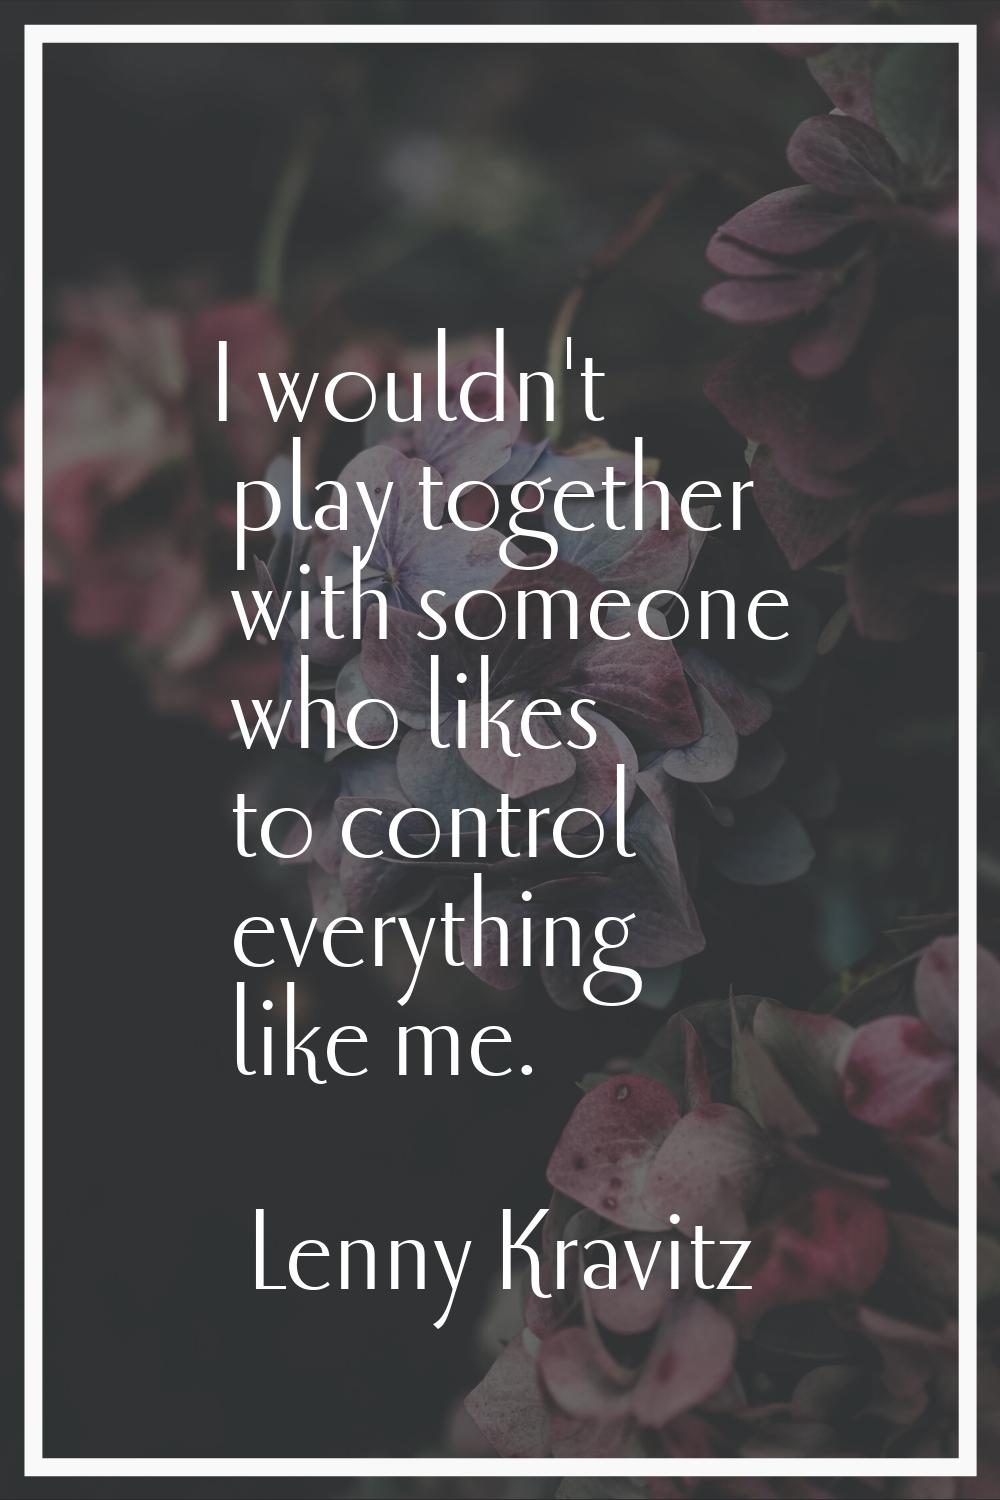 I wouldn't play together with someone who likes to control everything like me.